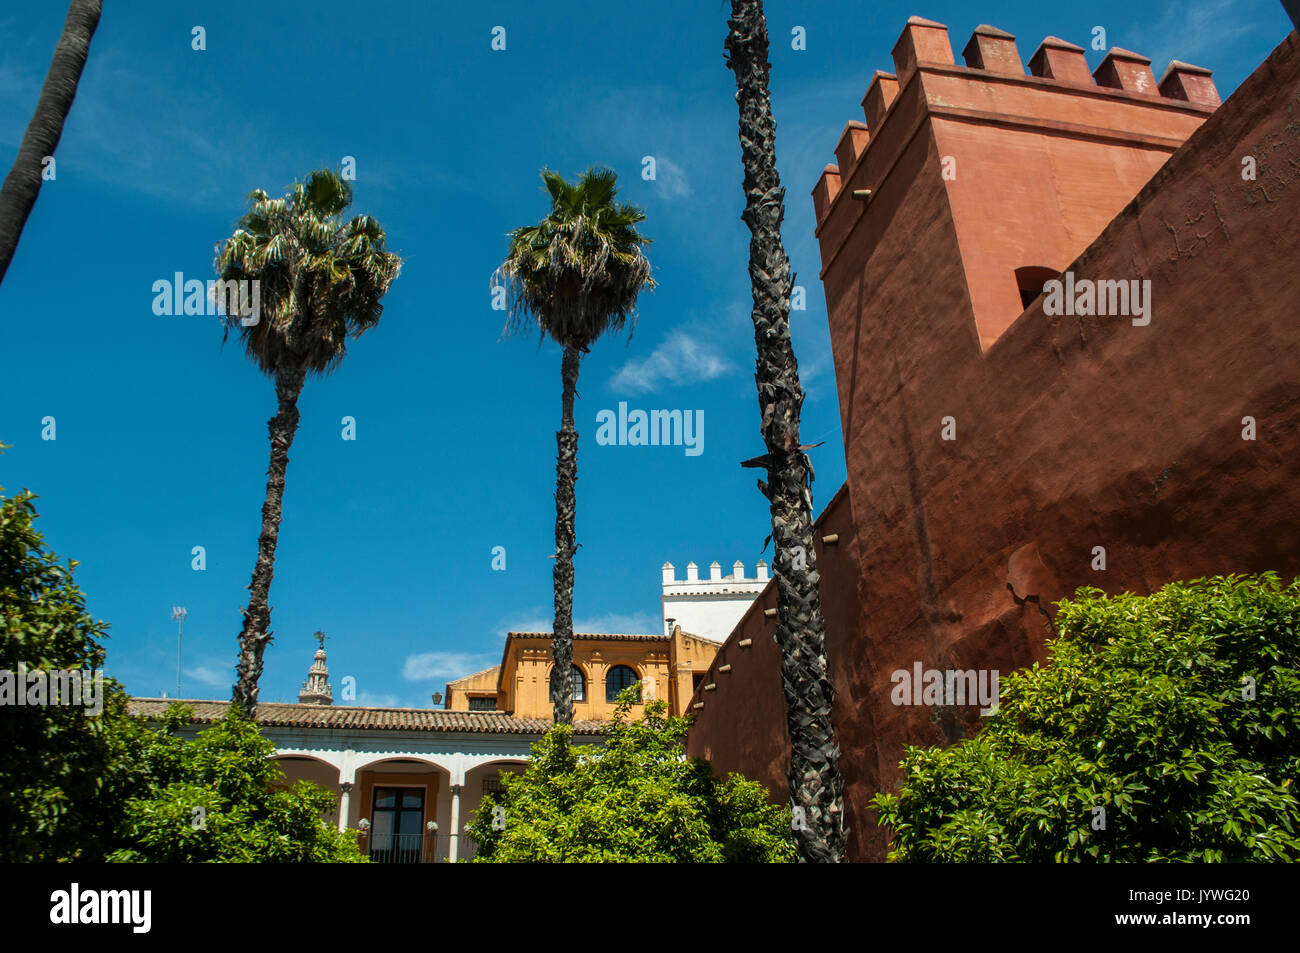 Architectural details and view of the gardens of Patio de la Alcubilla, a courtyard of the Alcazar of Seville, royal palace of mudejar architecture Stock Photo